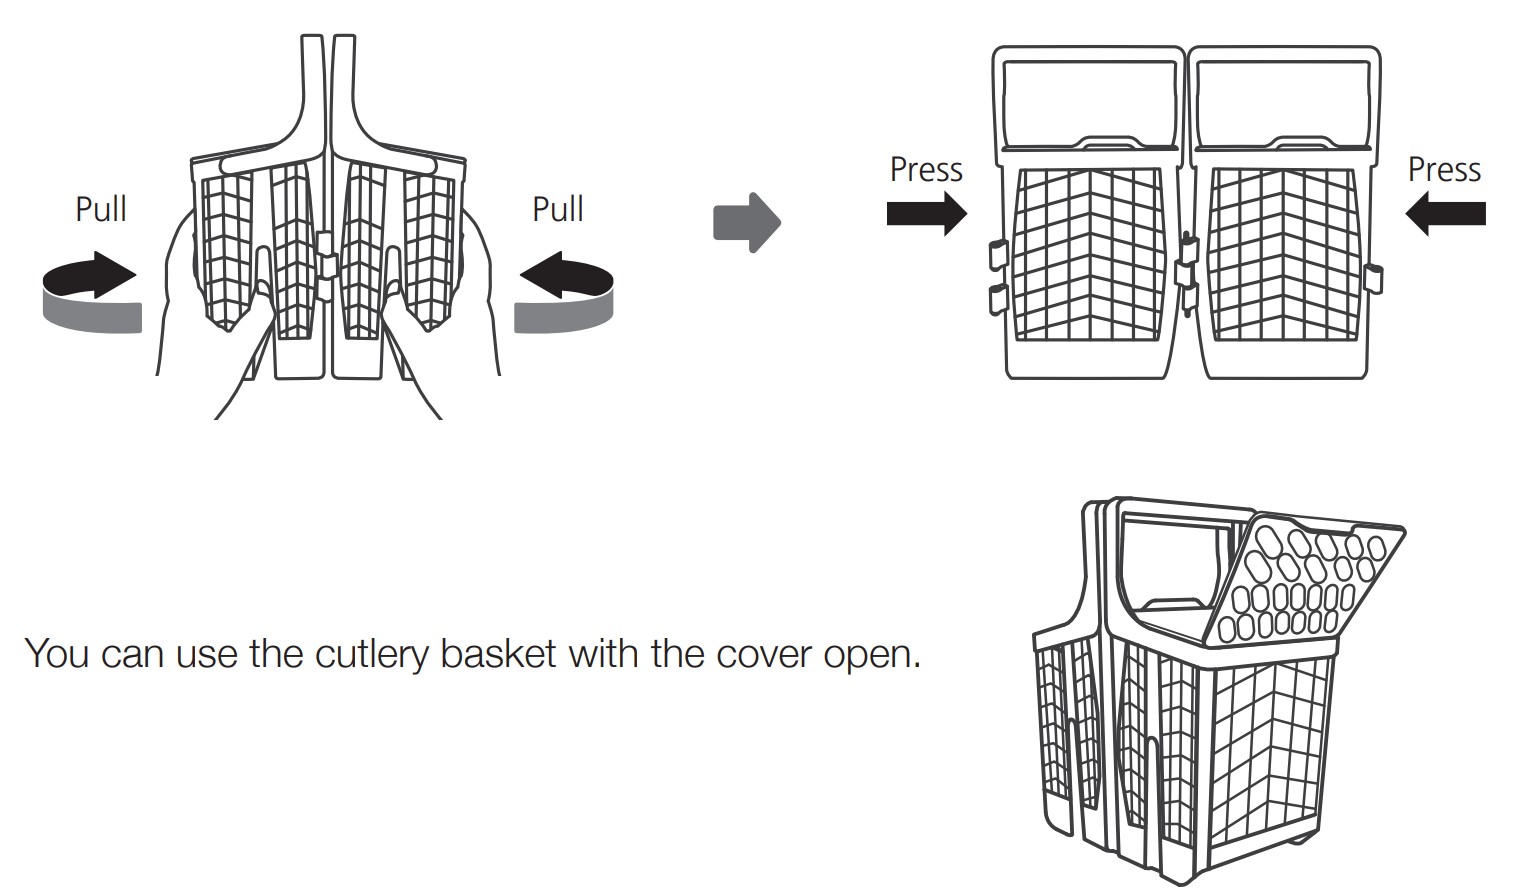 Inalto IDWD60SS 60cm Single Dishwasher Drawer - Two positions cutlery basket